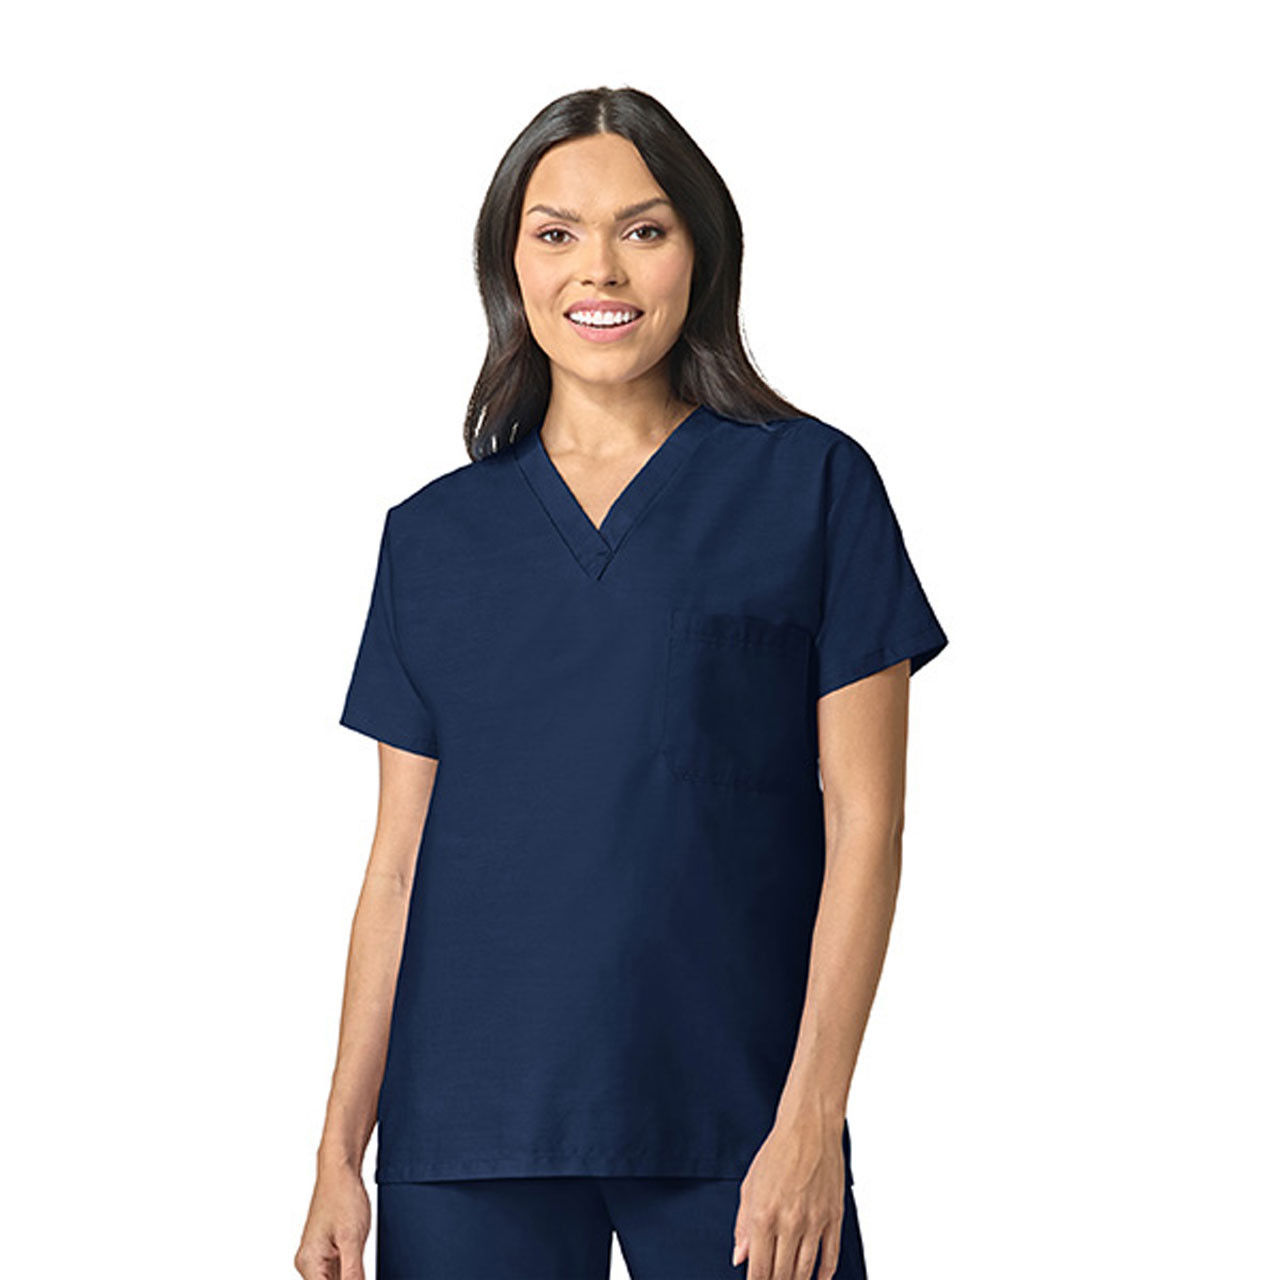 What color is the V Neck Scrub Top?